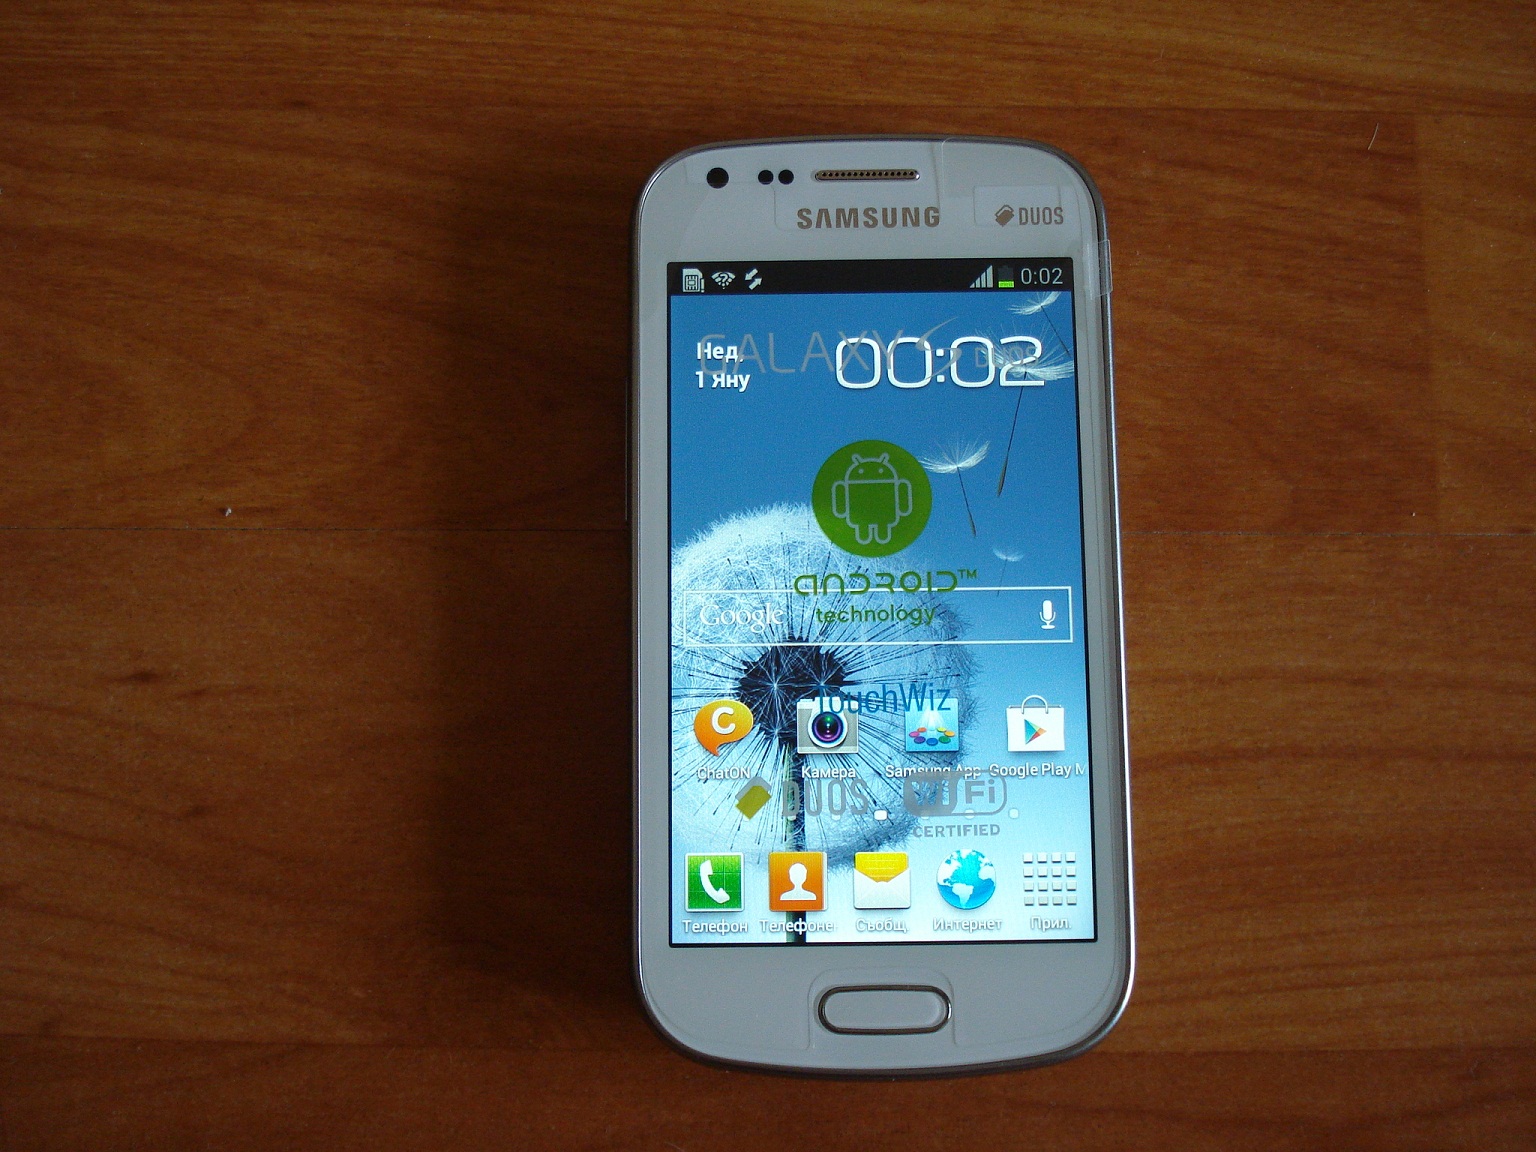 Samsung Galaxy S Duos S7562 Dual-SIM Android smartphone | Test and ...